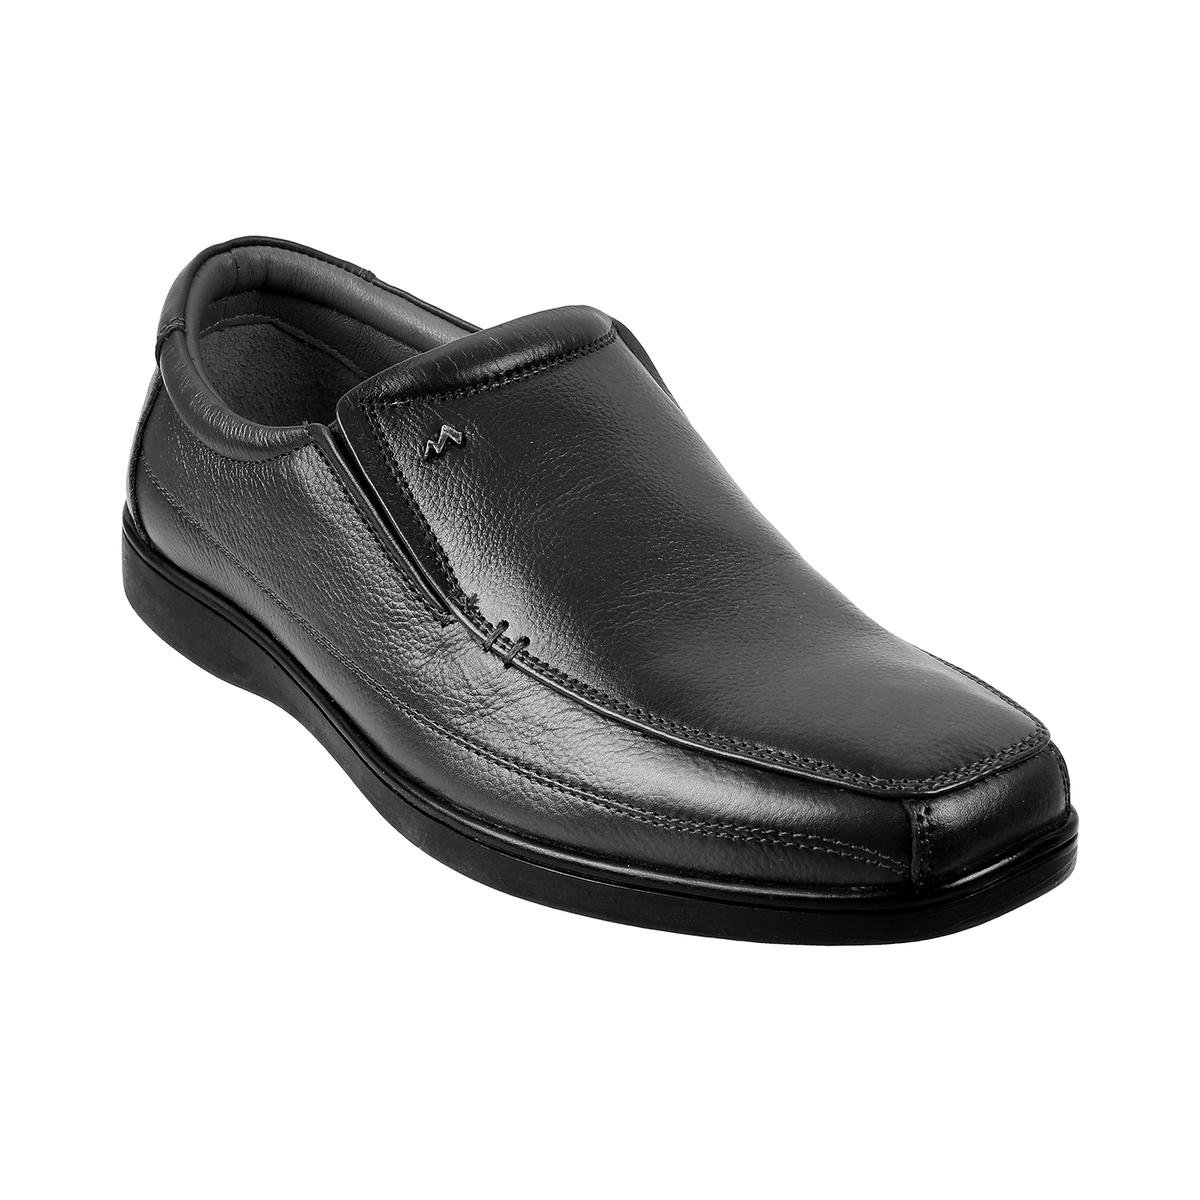 Shoes for Men - Buy Mens Shoes Online at Best Price - Metro Shoes